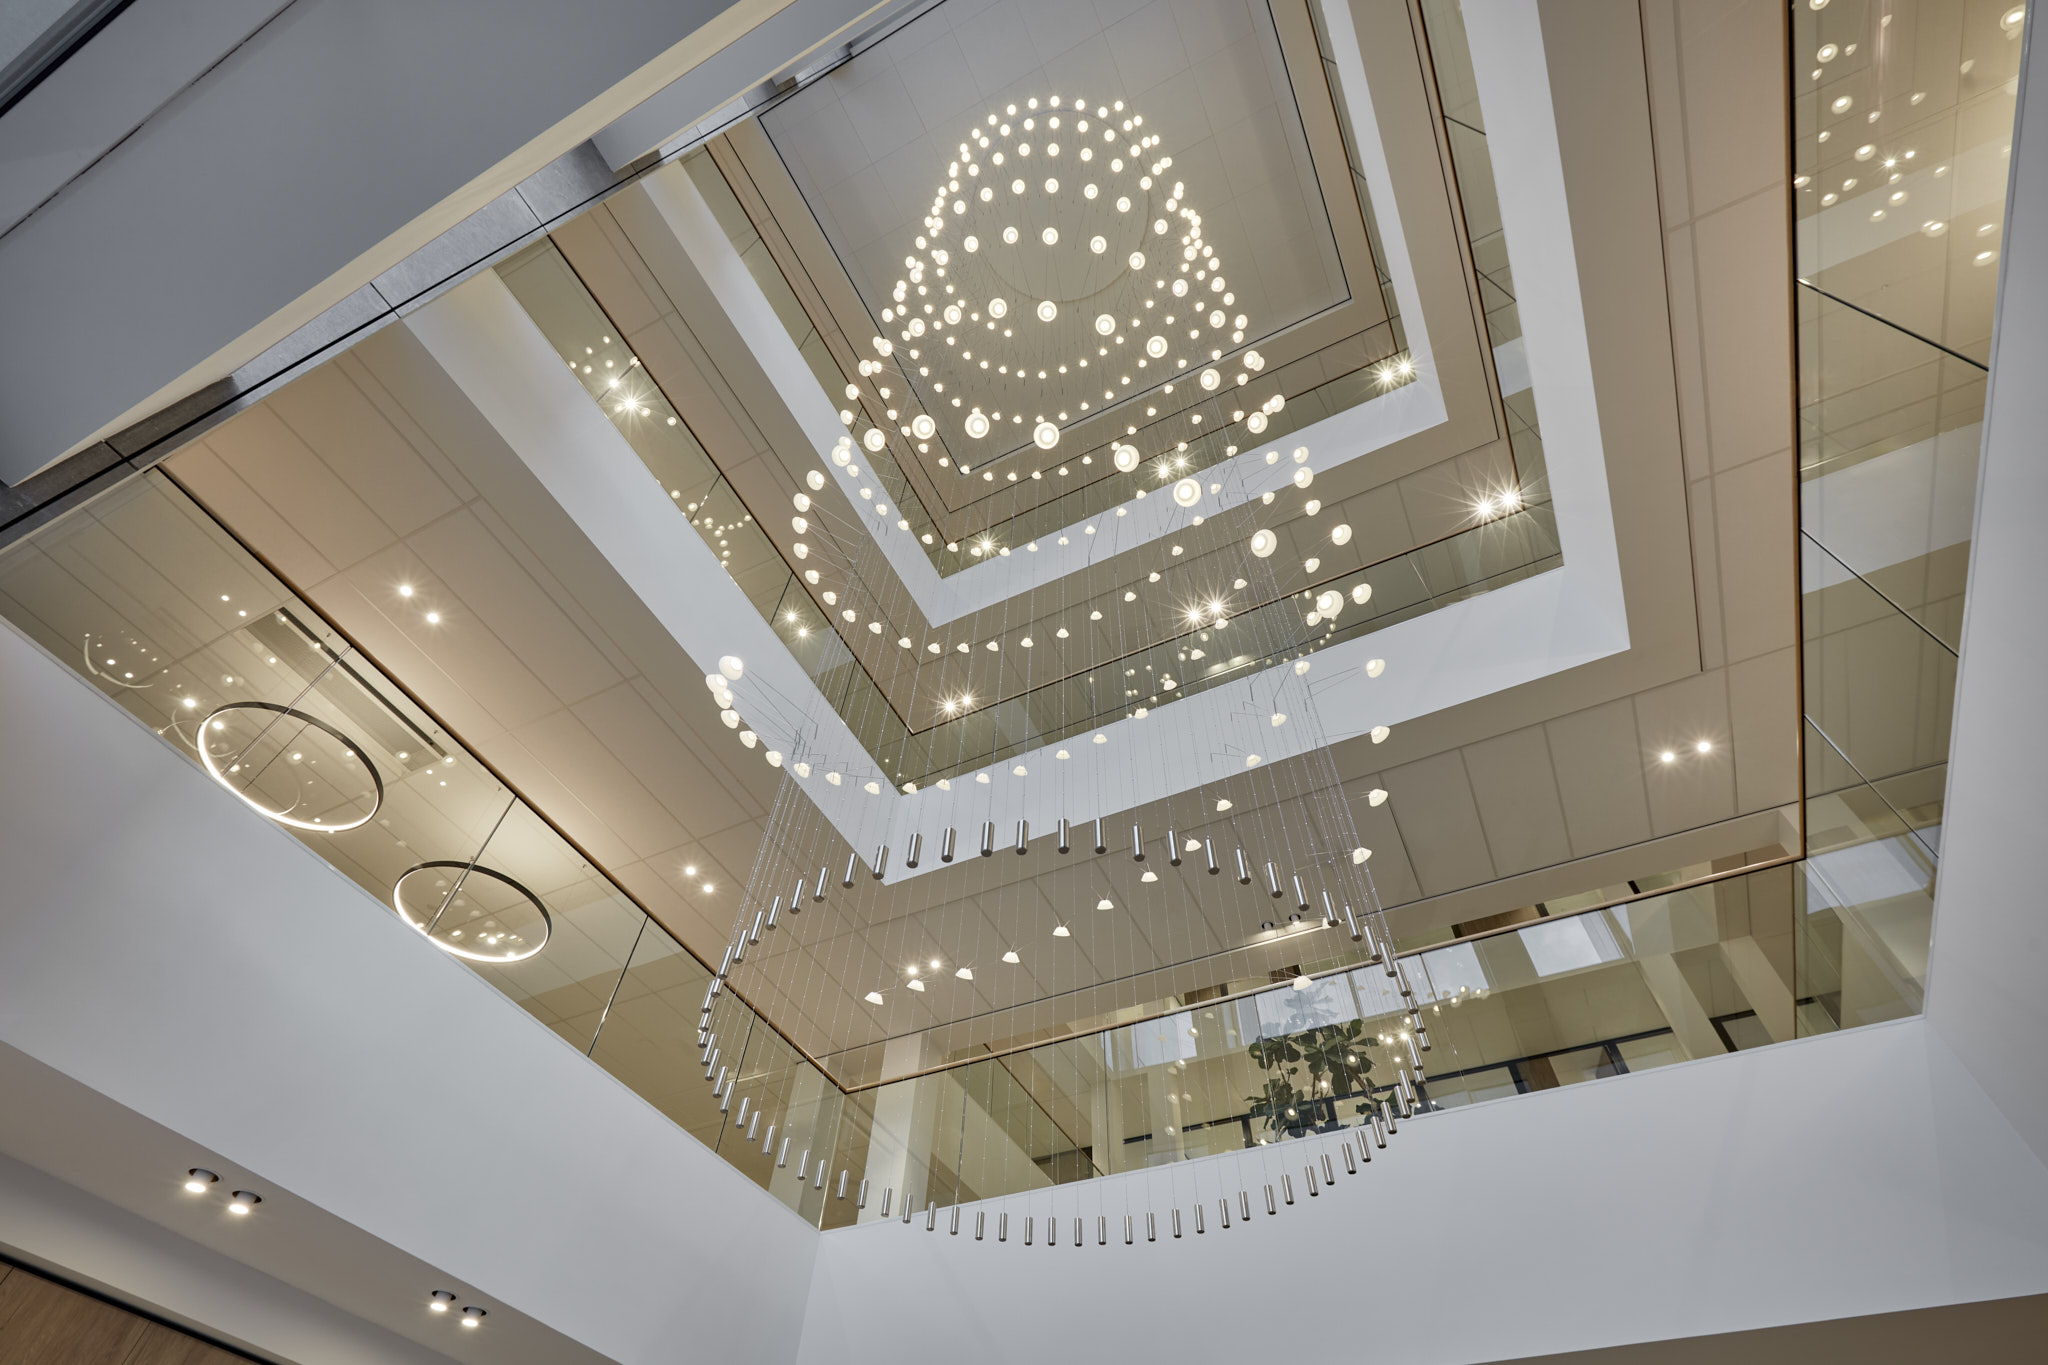 VDL Head office is based in Eindhoven, THE NETHERLANDS. This technical company felt in love with our technical light sculpture. From every floor you will see the light sculpture from a different perspective. The whole organisation of lights changes by the point you look at it.